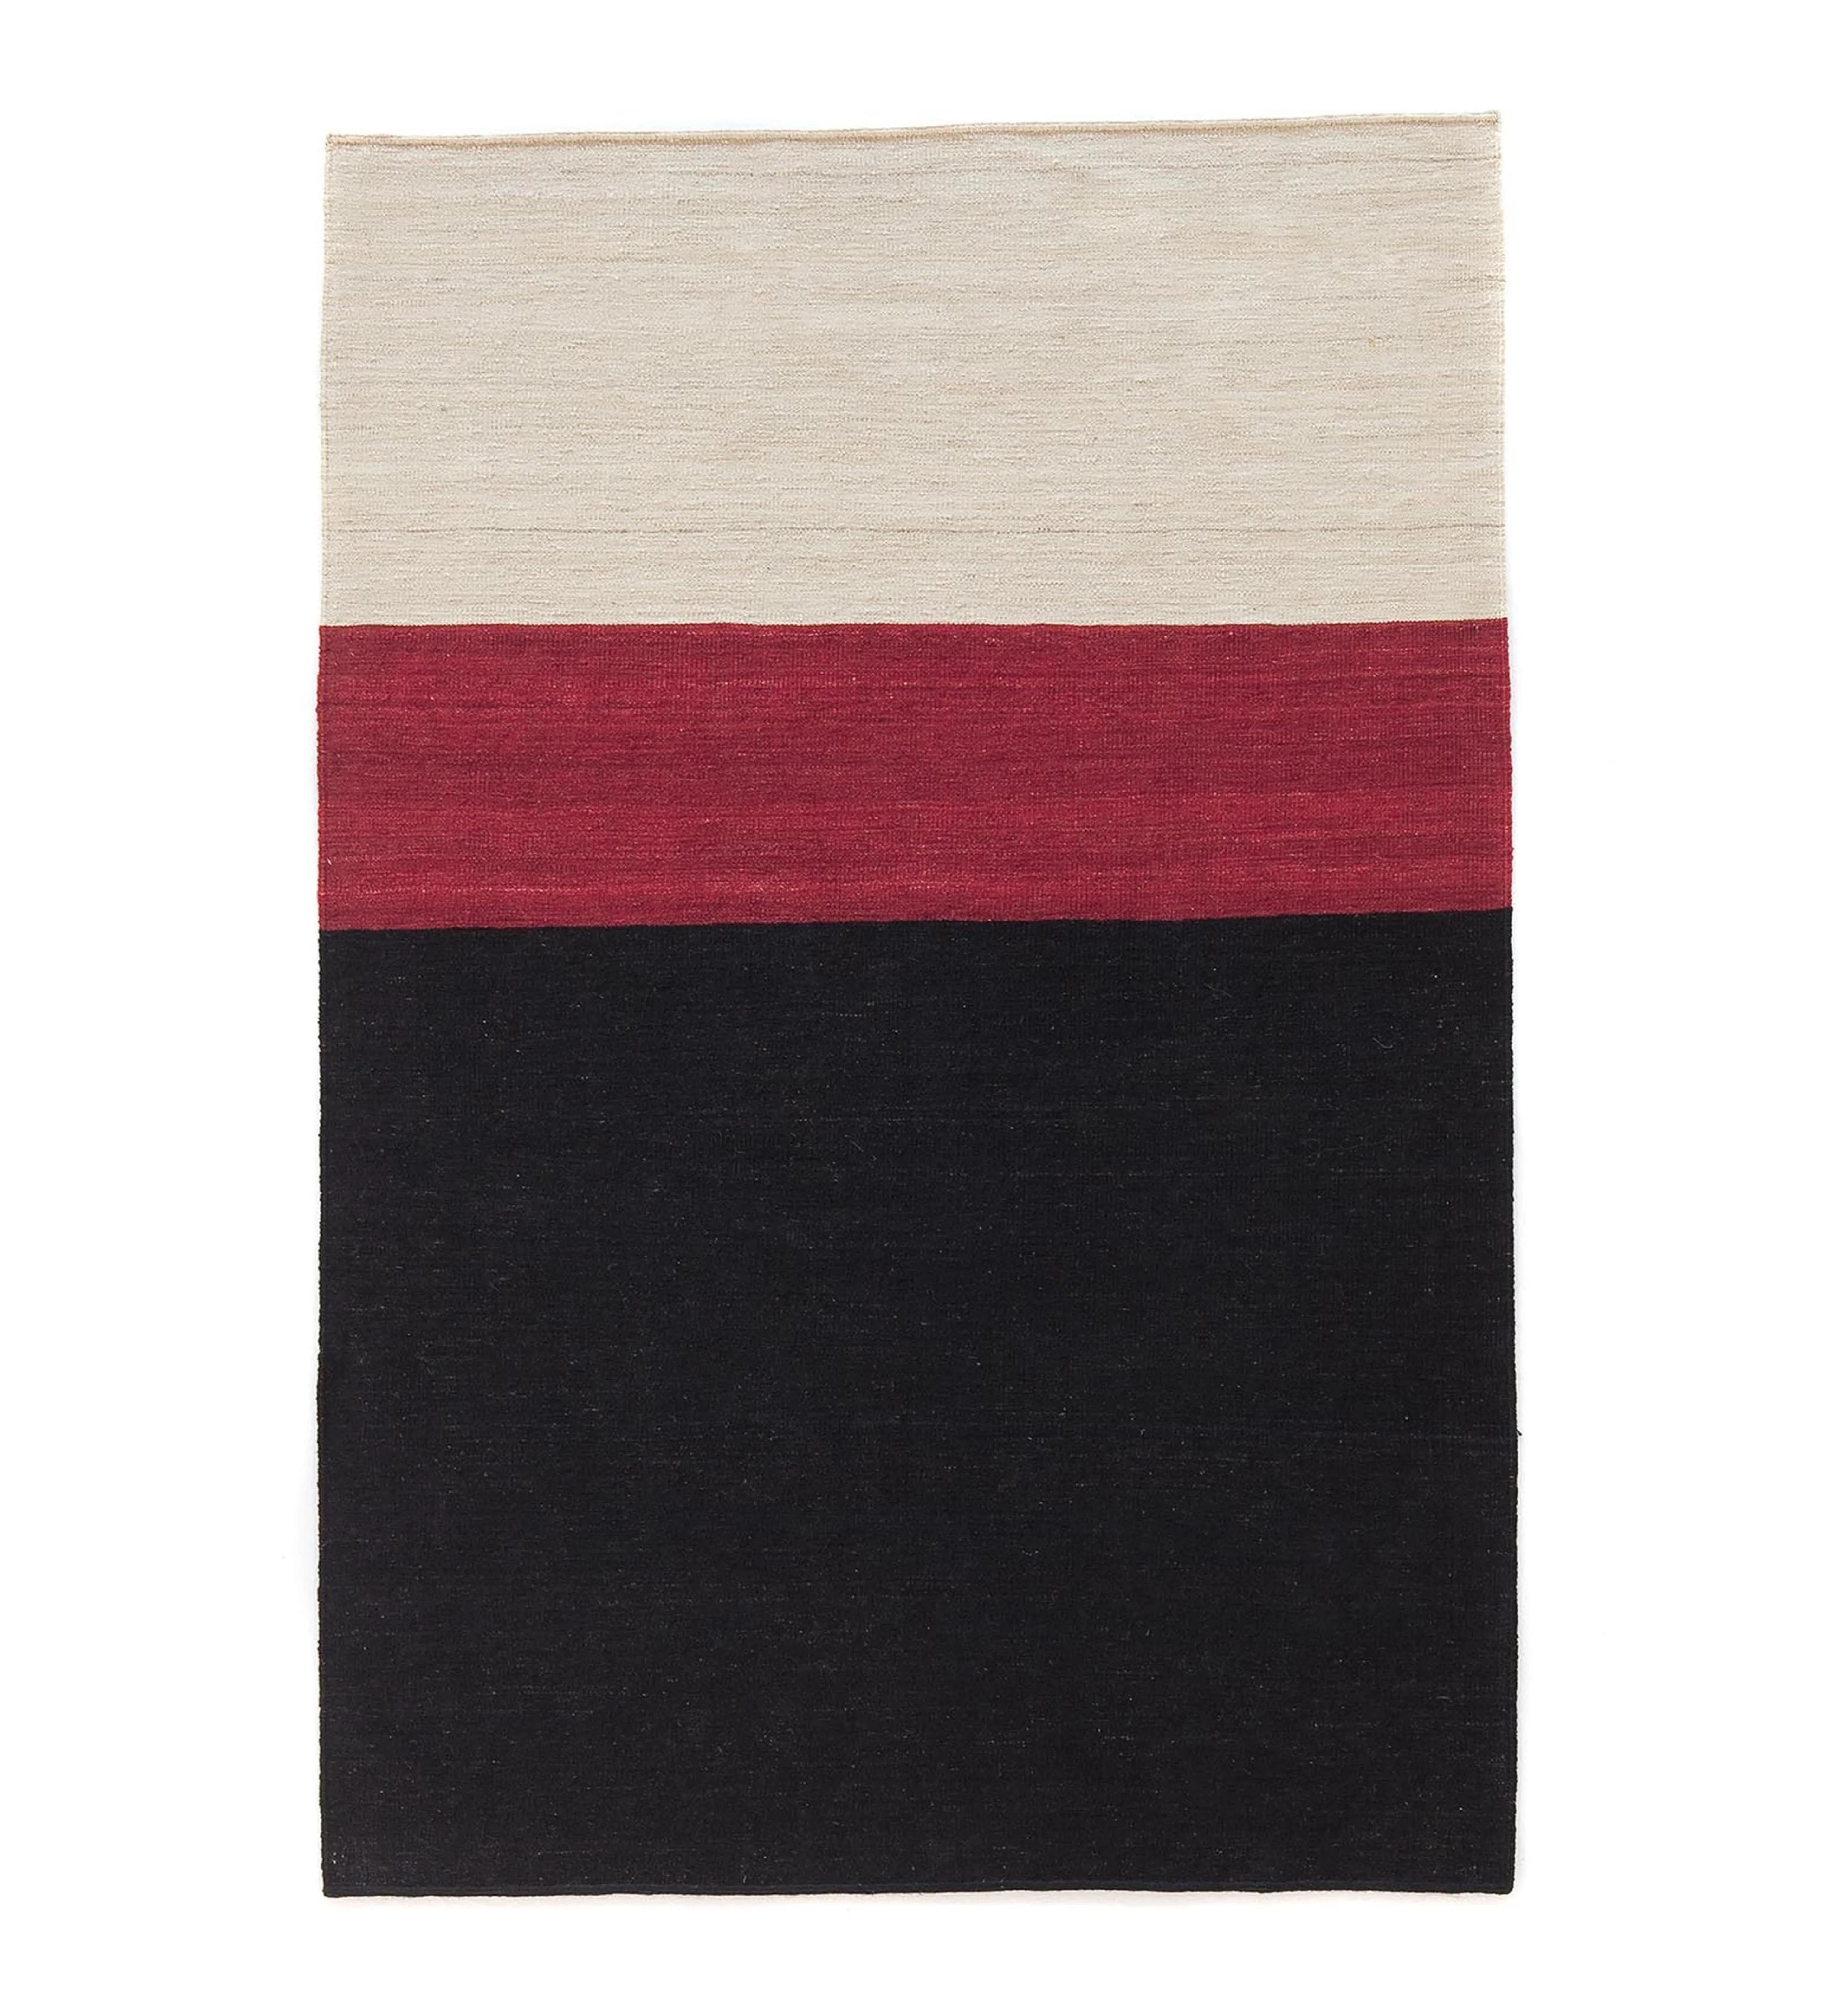 'Mélange Color 1' Hand-Loomed Rug by Sybilla for Nanimarquina For Sale 1